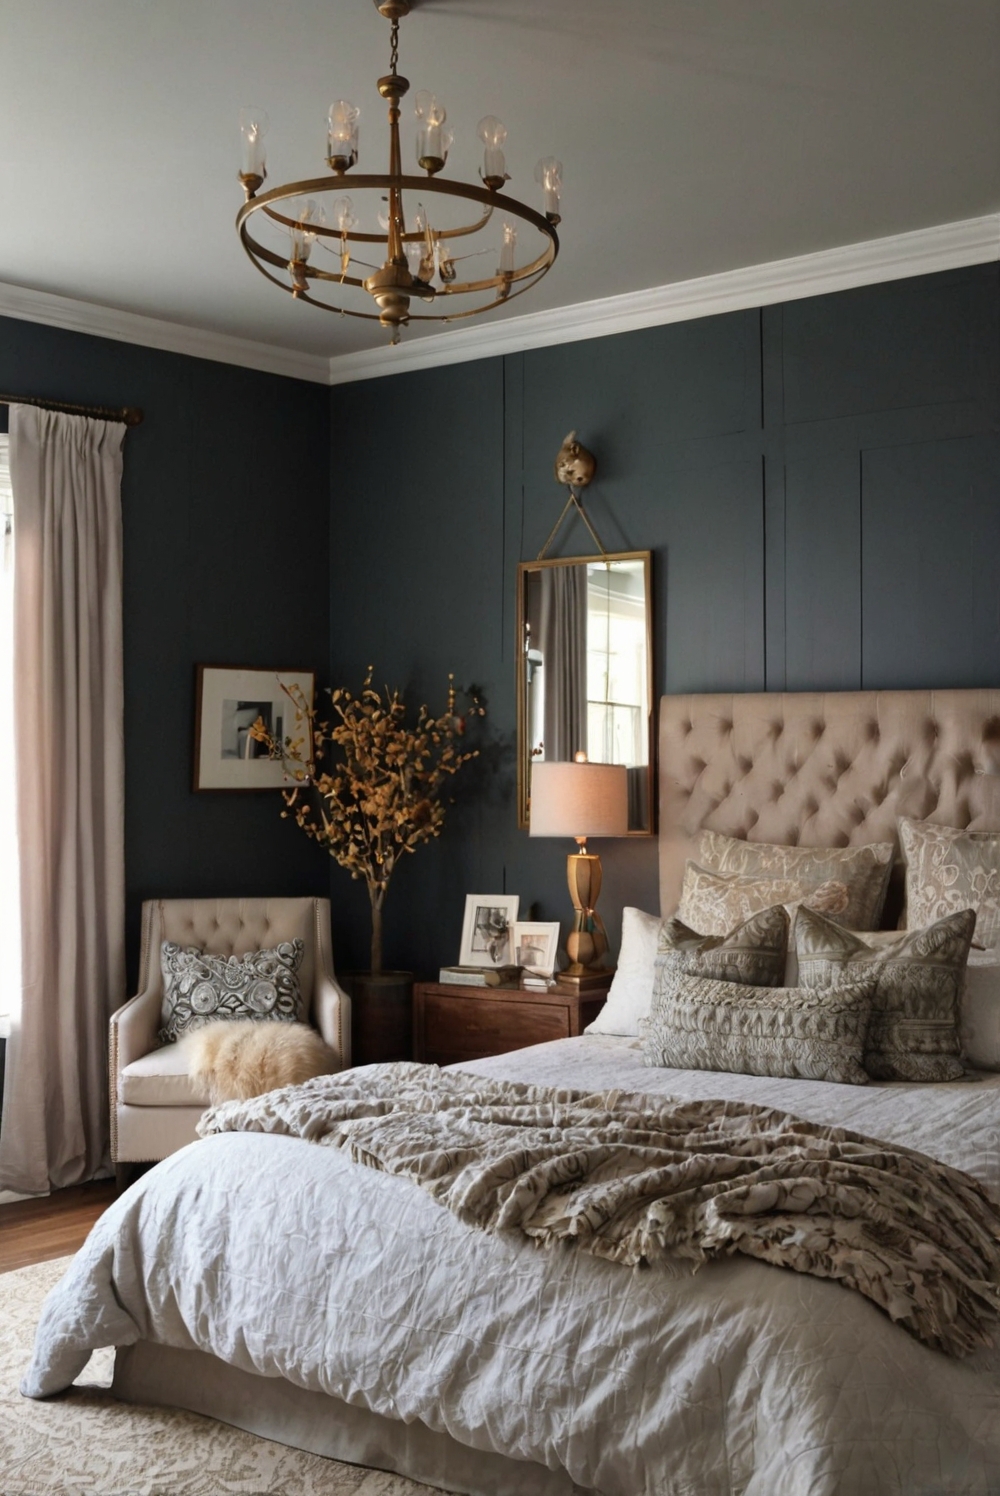 bedroom color ideas, ideal bedroom paint, paint selection for bedroom walls, wall paint finishes, bedroom decorating ideas, bedroom interior design, bedroom color schemes